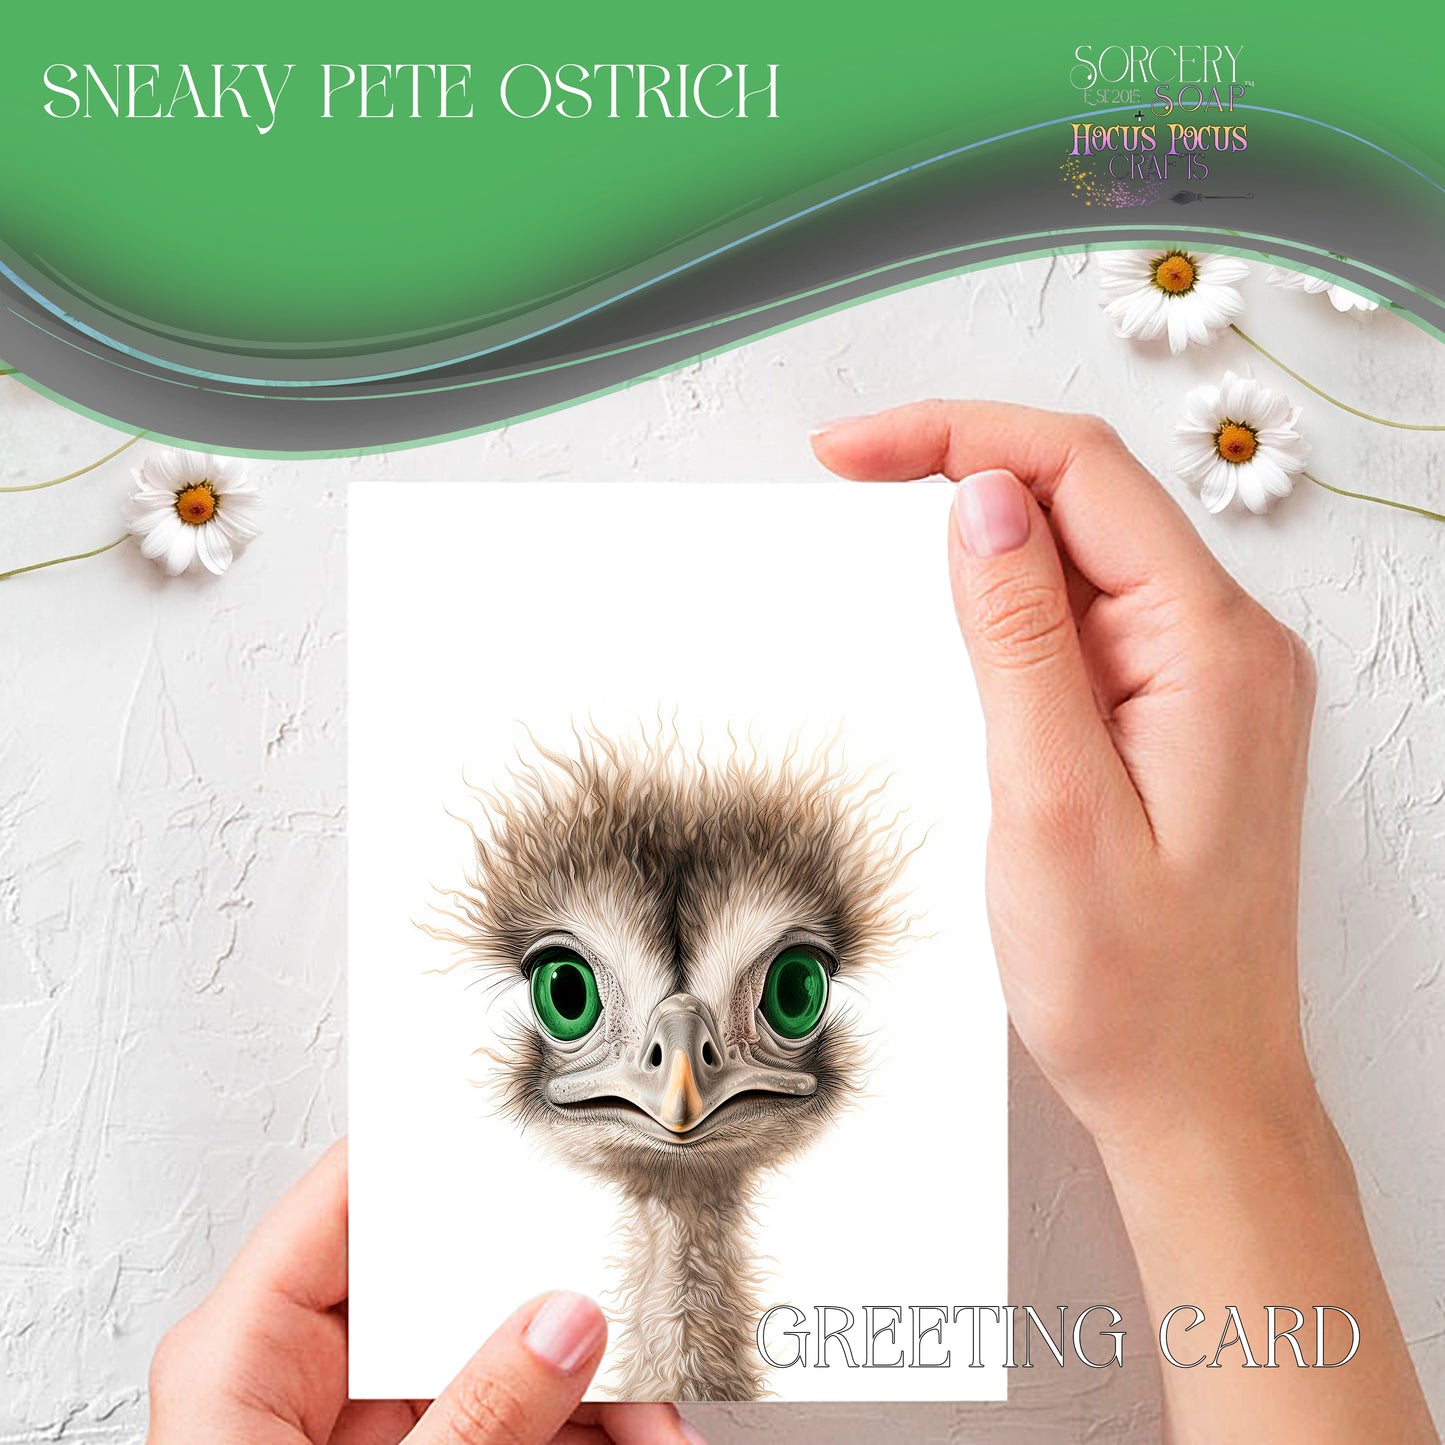 Sneaky Pete Ostrich Greeting Card